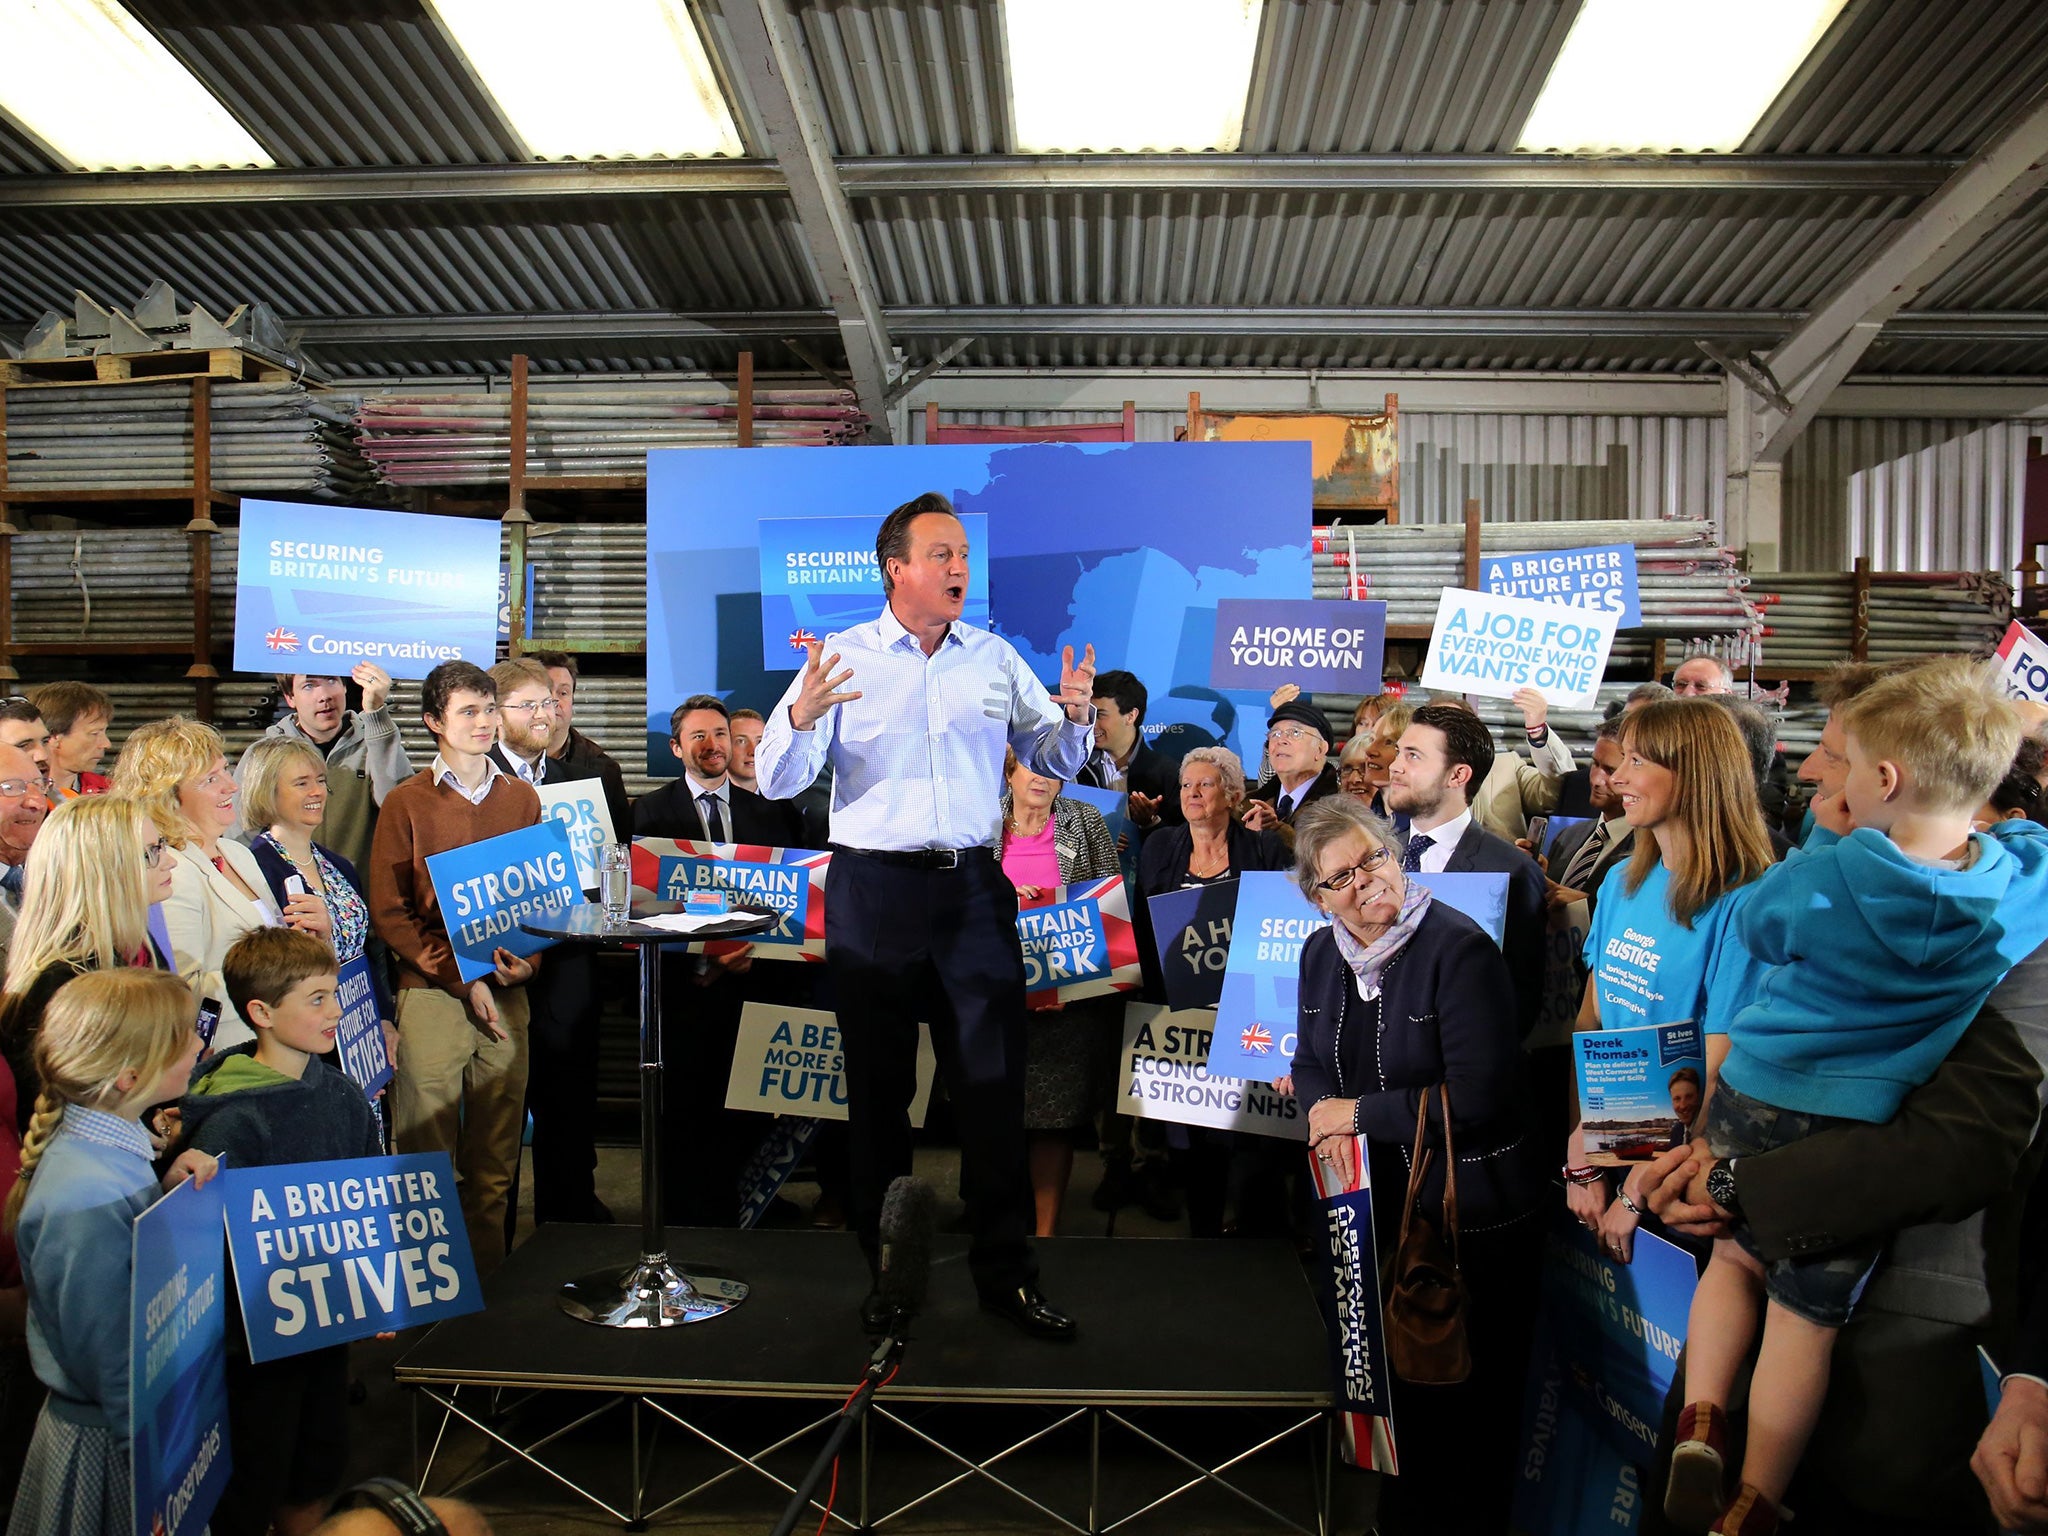 Prime Minister David Cameron speaks during a campaign visit to Chris Sedgeman Scaffolding in Penzance